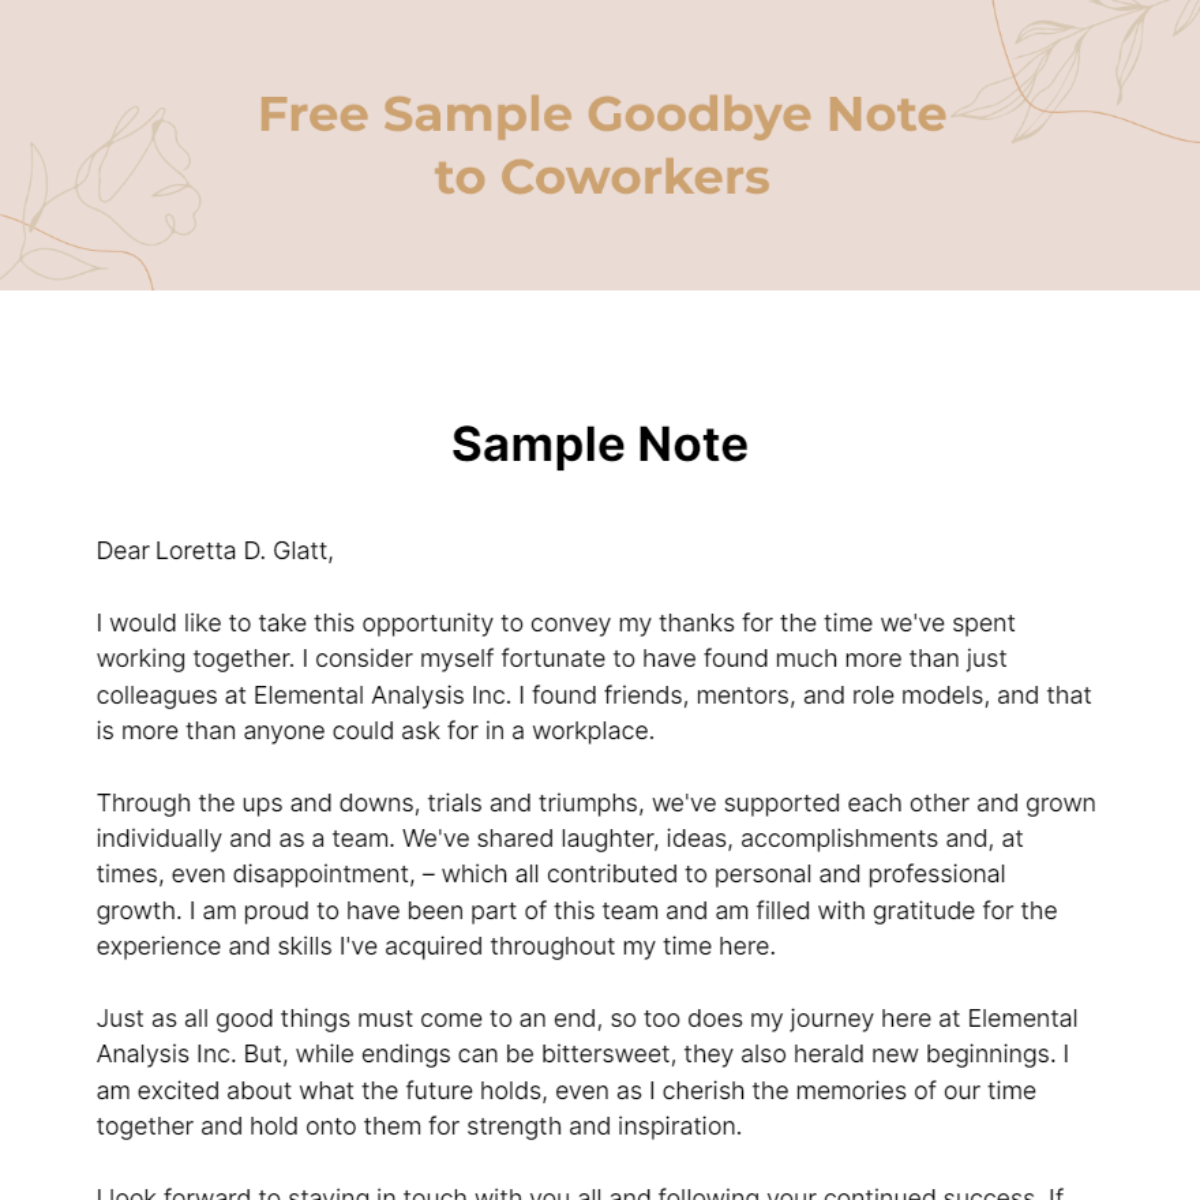 Sample Goodbye Note to Coworkers Template